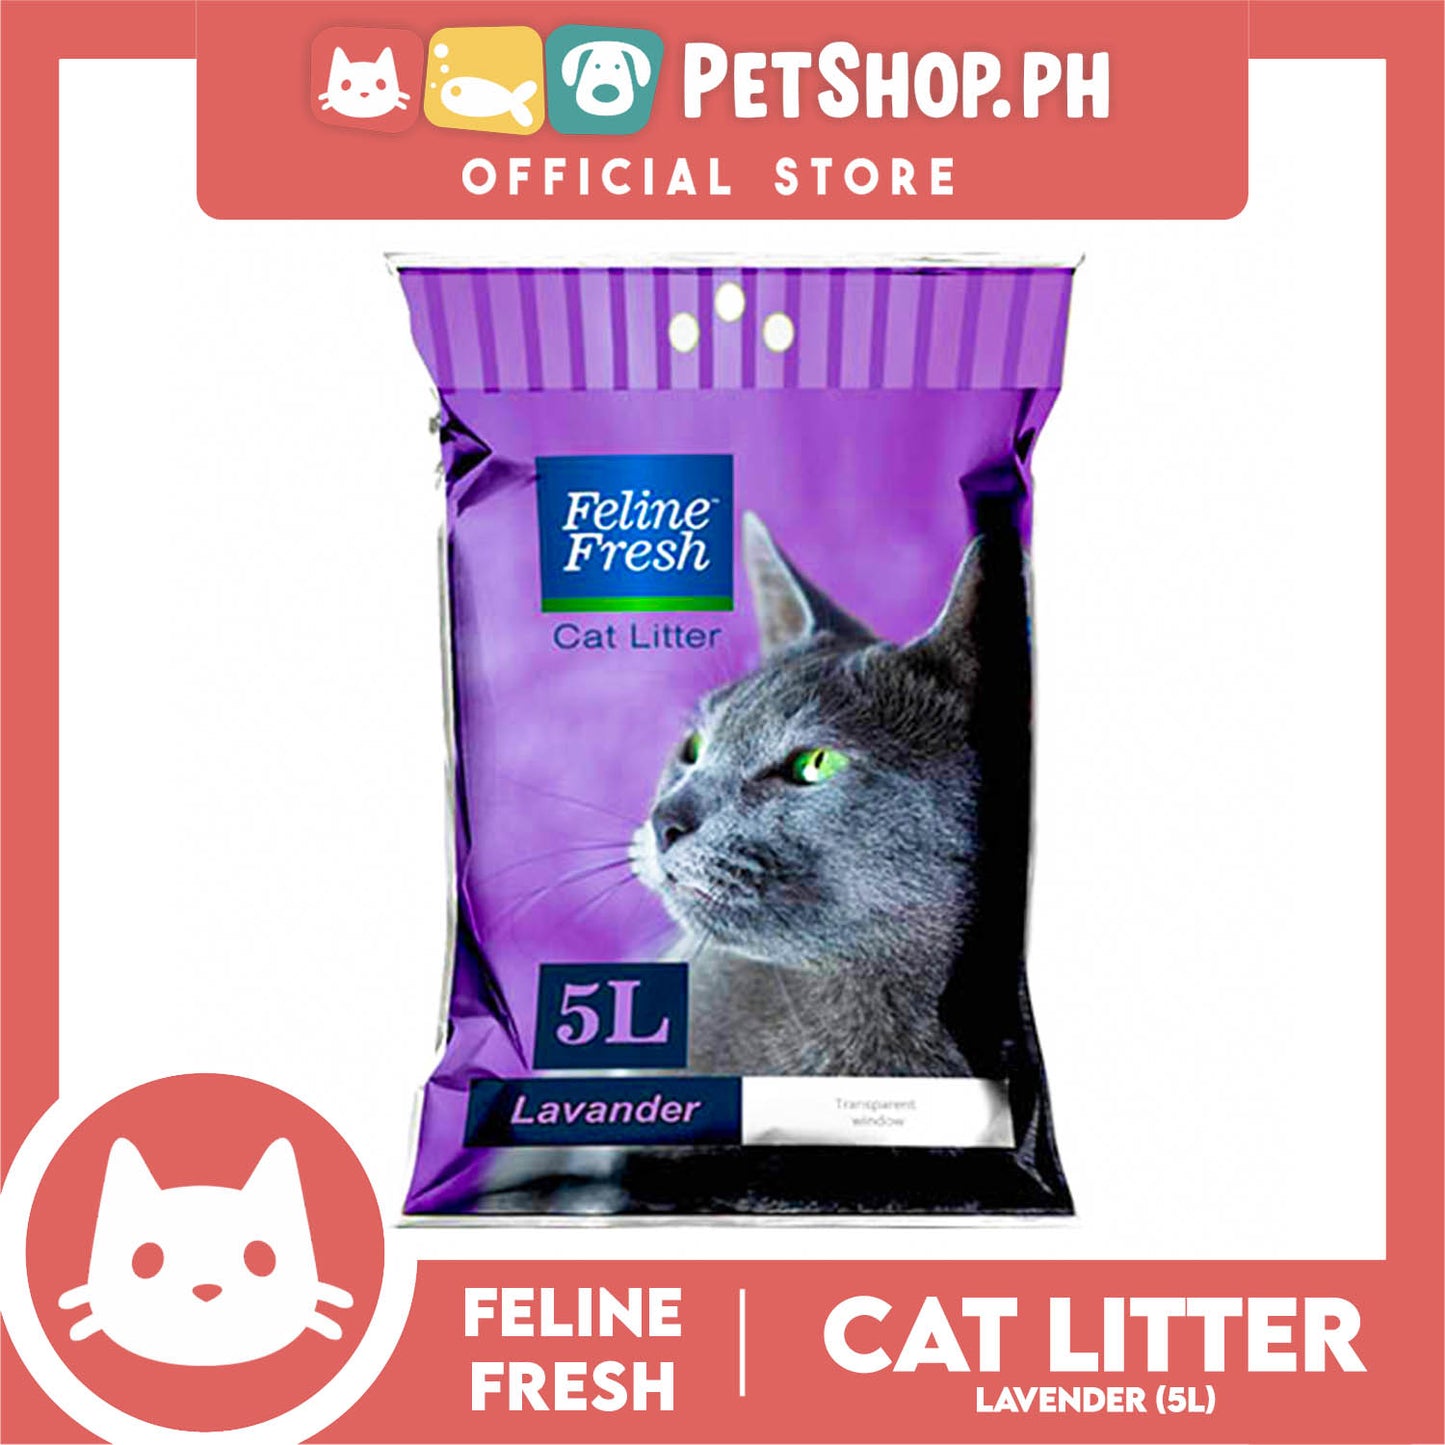 Feline Fresh Cat Litter Sand 5 Liters (Lavender Scent) 99% Dust-Free, High Absorbency, Minimal Tracking For Cats Of All Ages